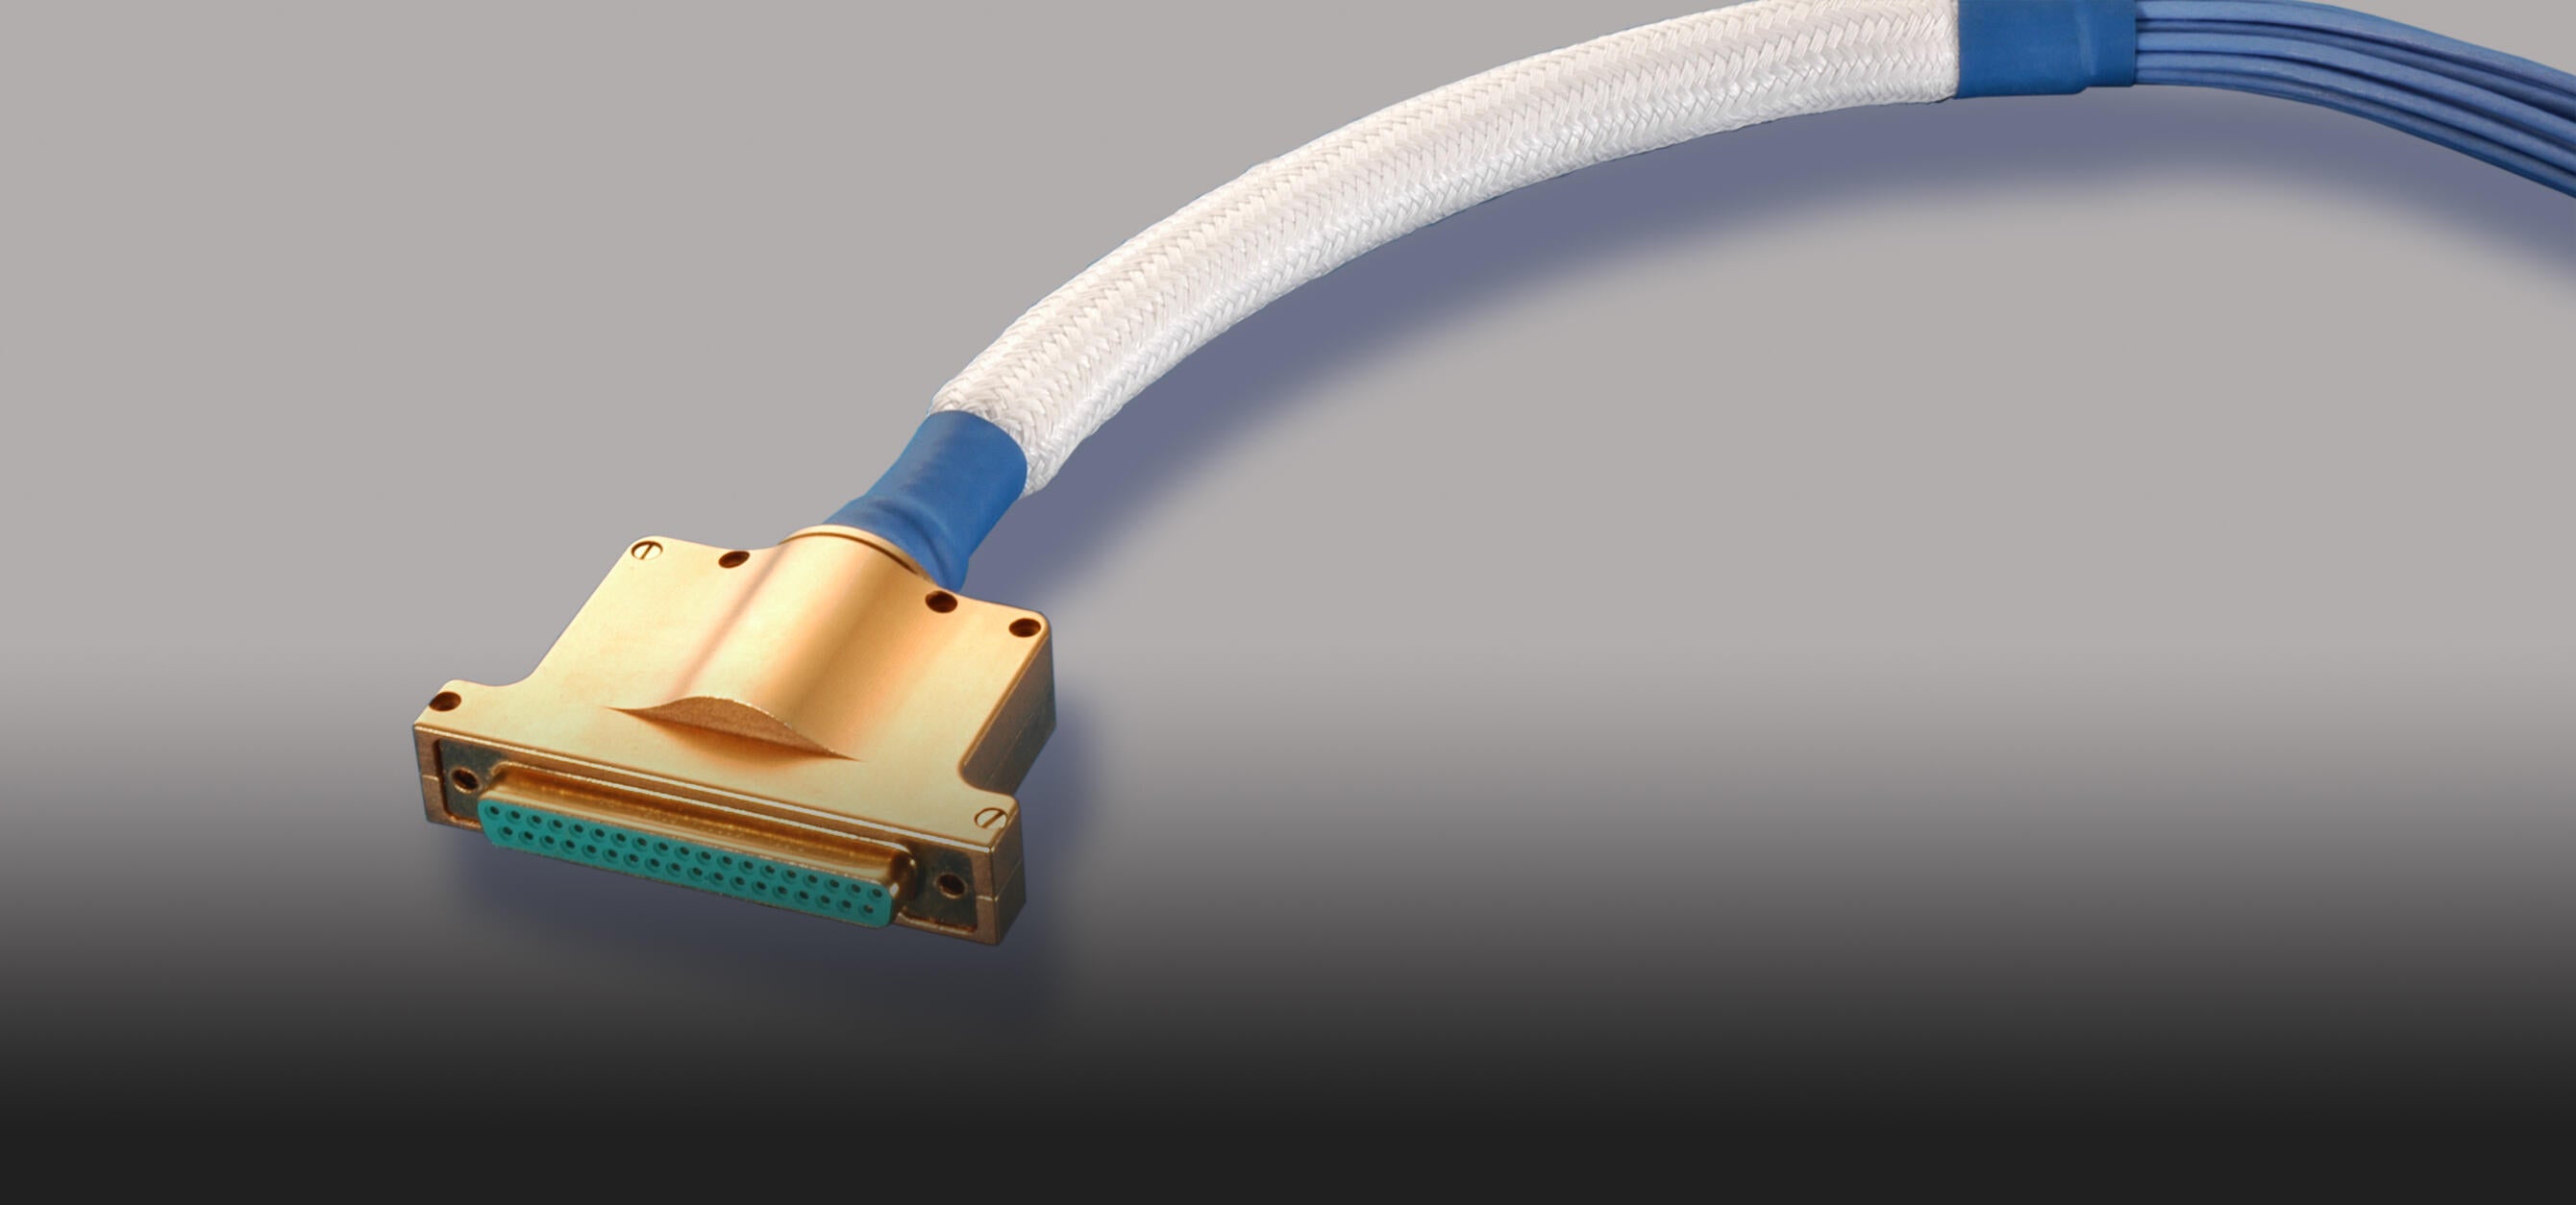 GORE® Space Cables and Assemblies: LVDS Interconnects | Gore